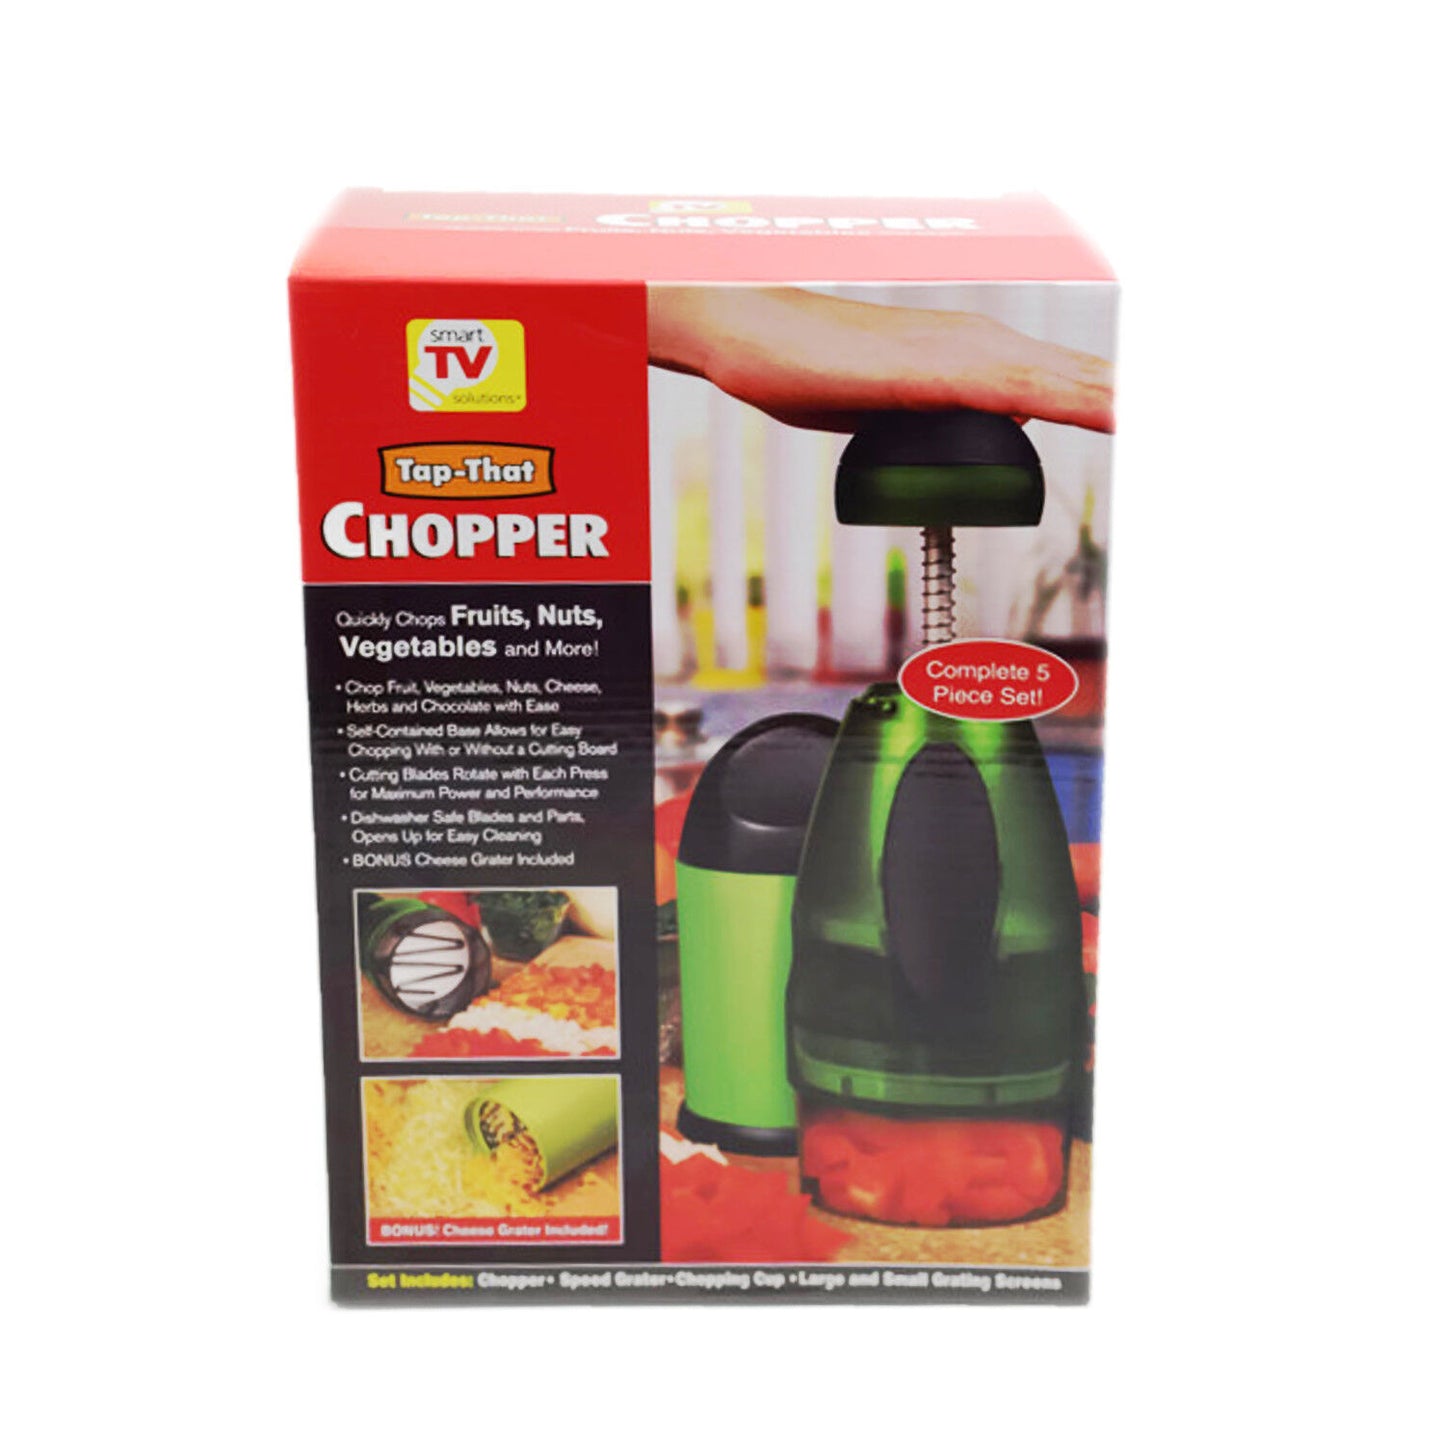 Tap-That Chopper Complete 5 piece set {Brand New}